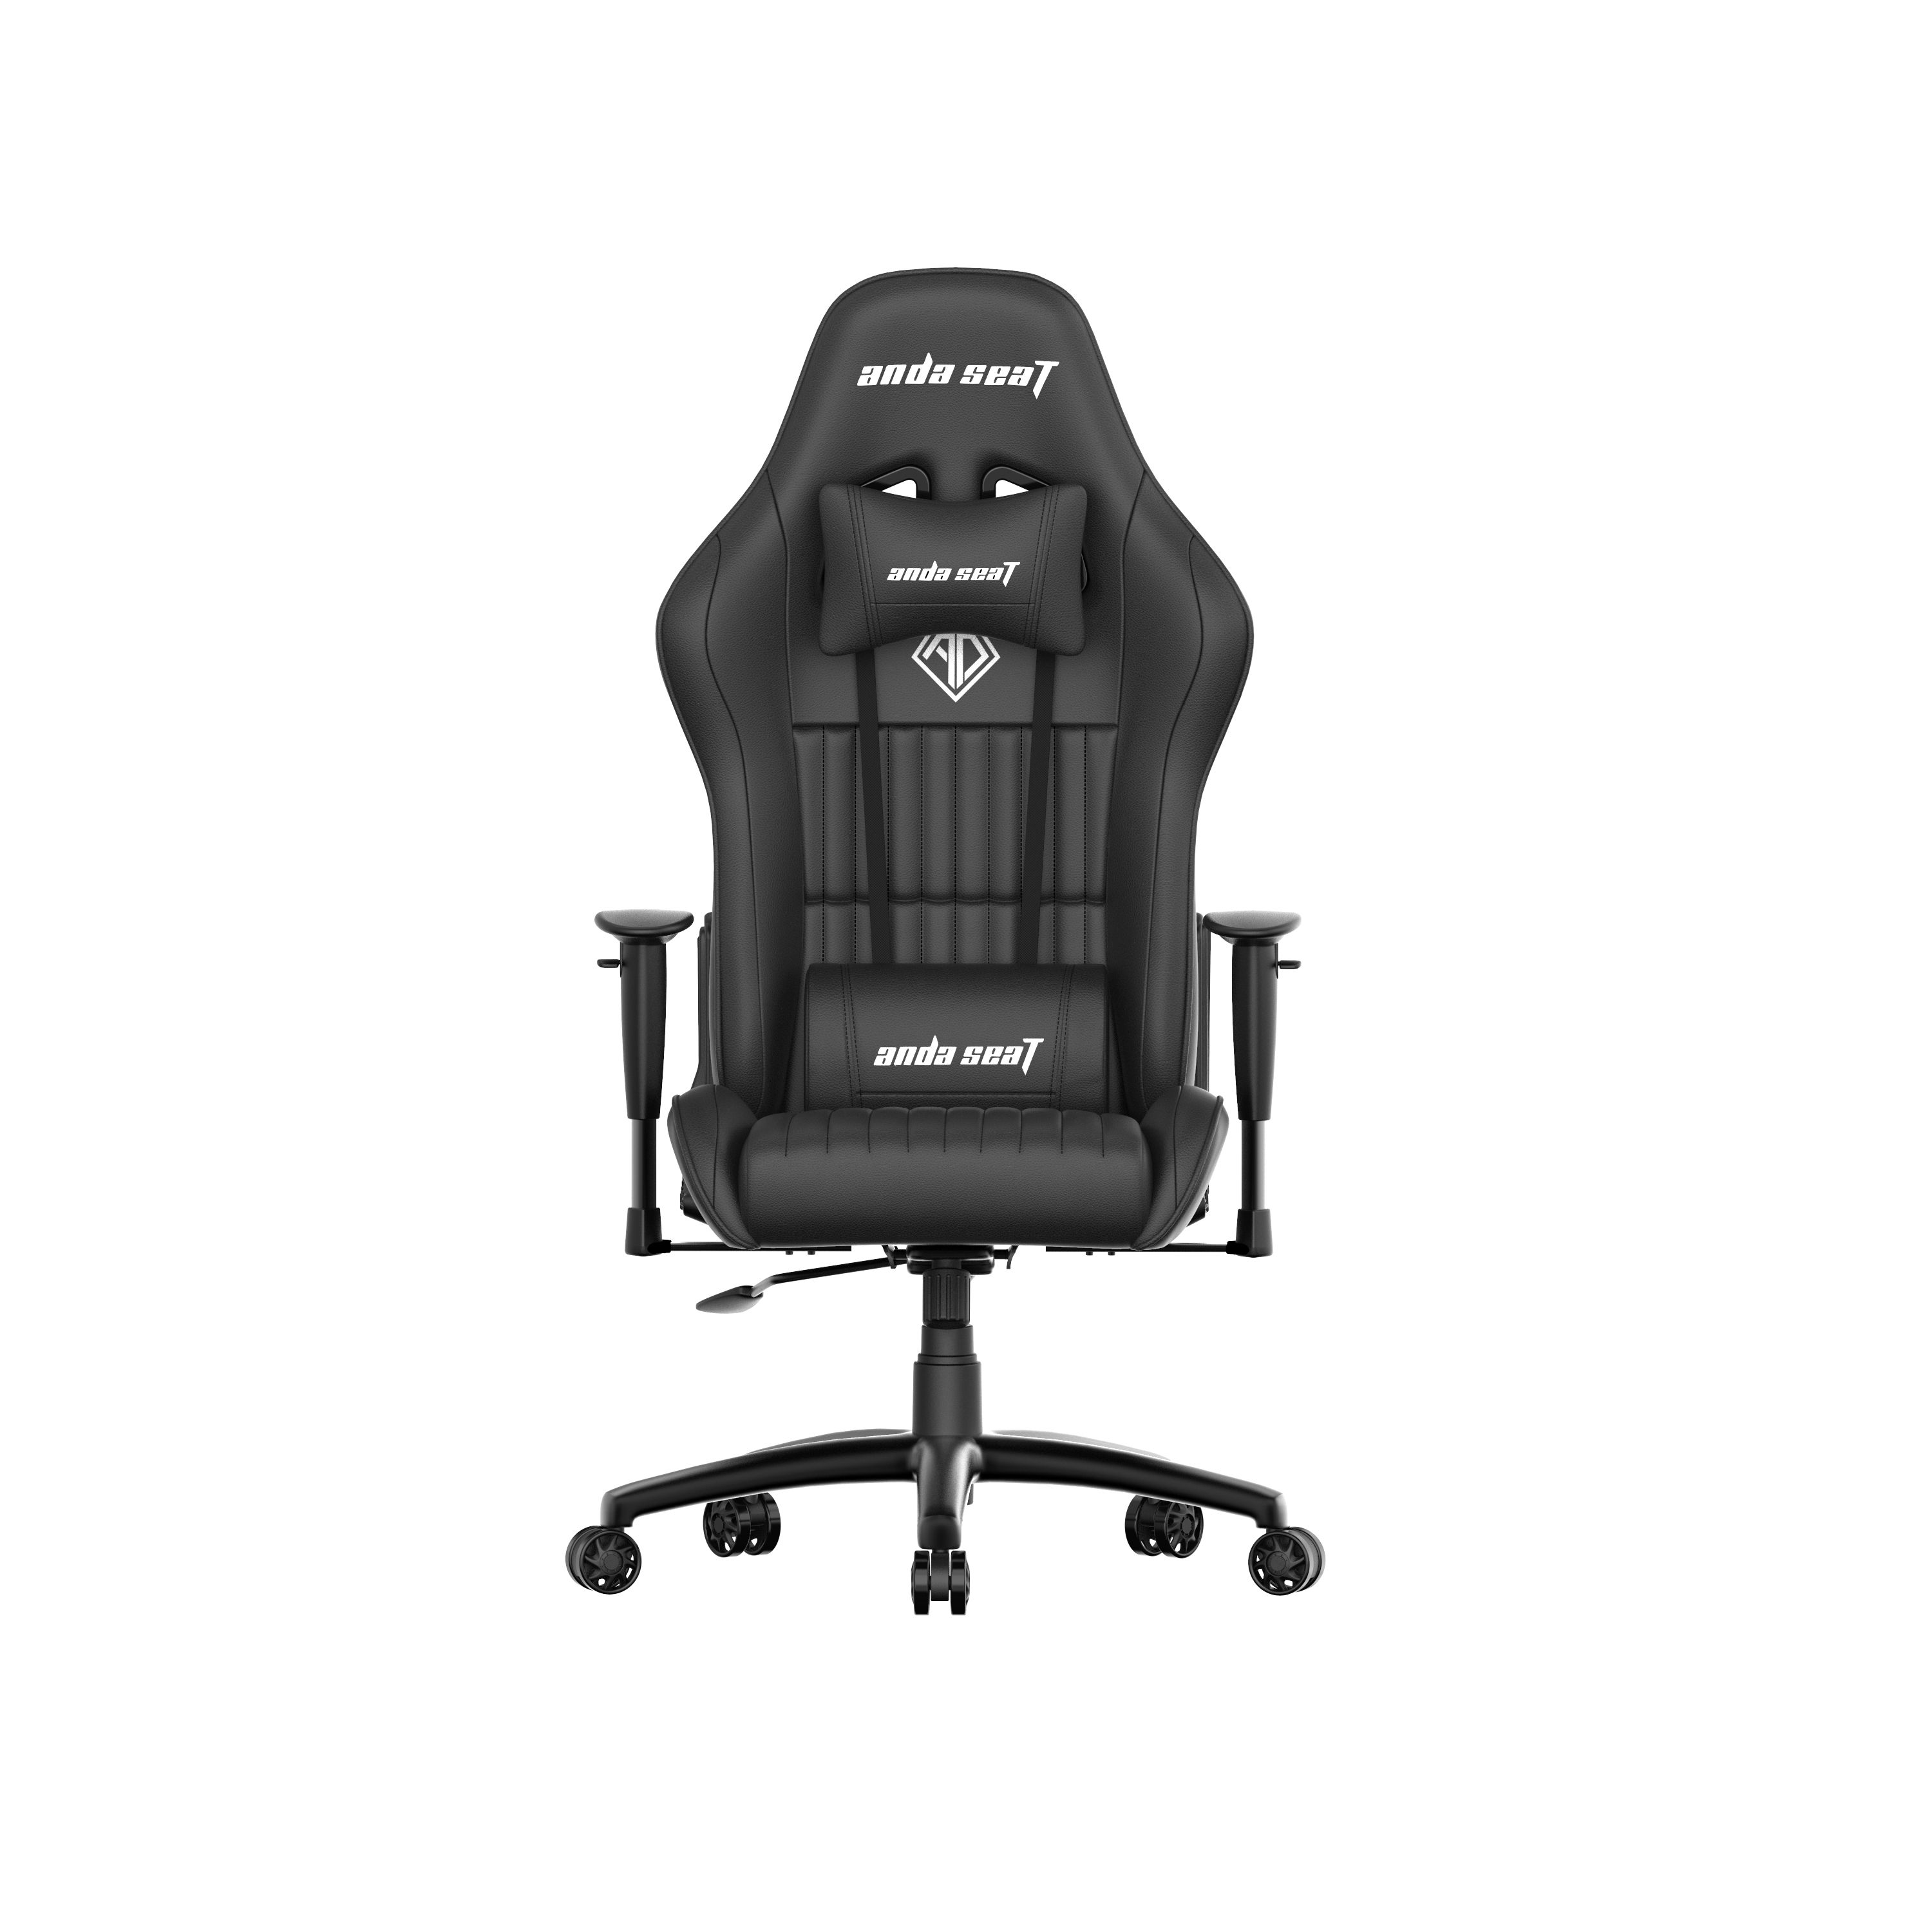 AndaSeat Jungle Series Premium Gaming Chair Review Welcome To The Jungle